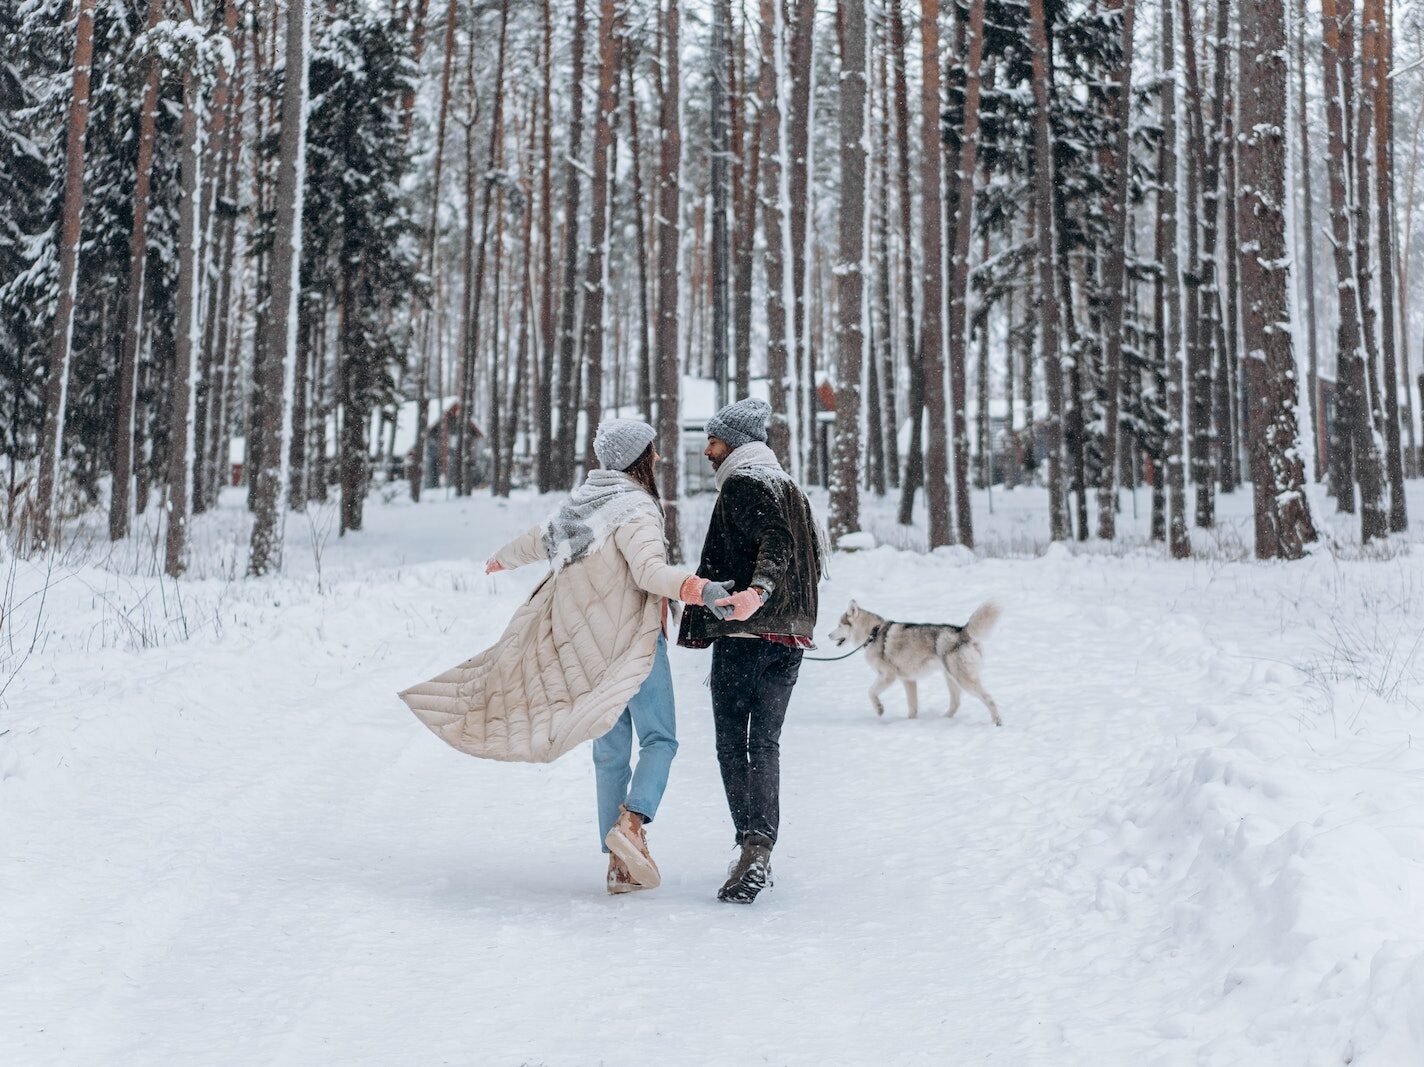 Back View of a Couple Walking on Snow Together